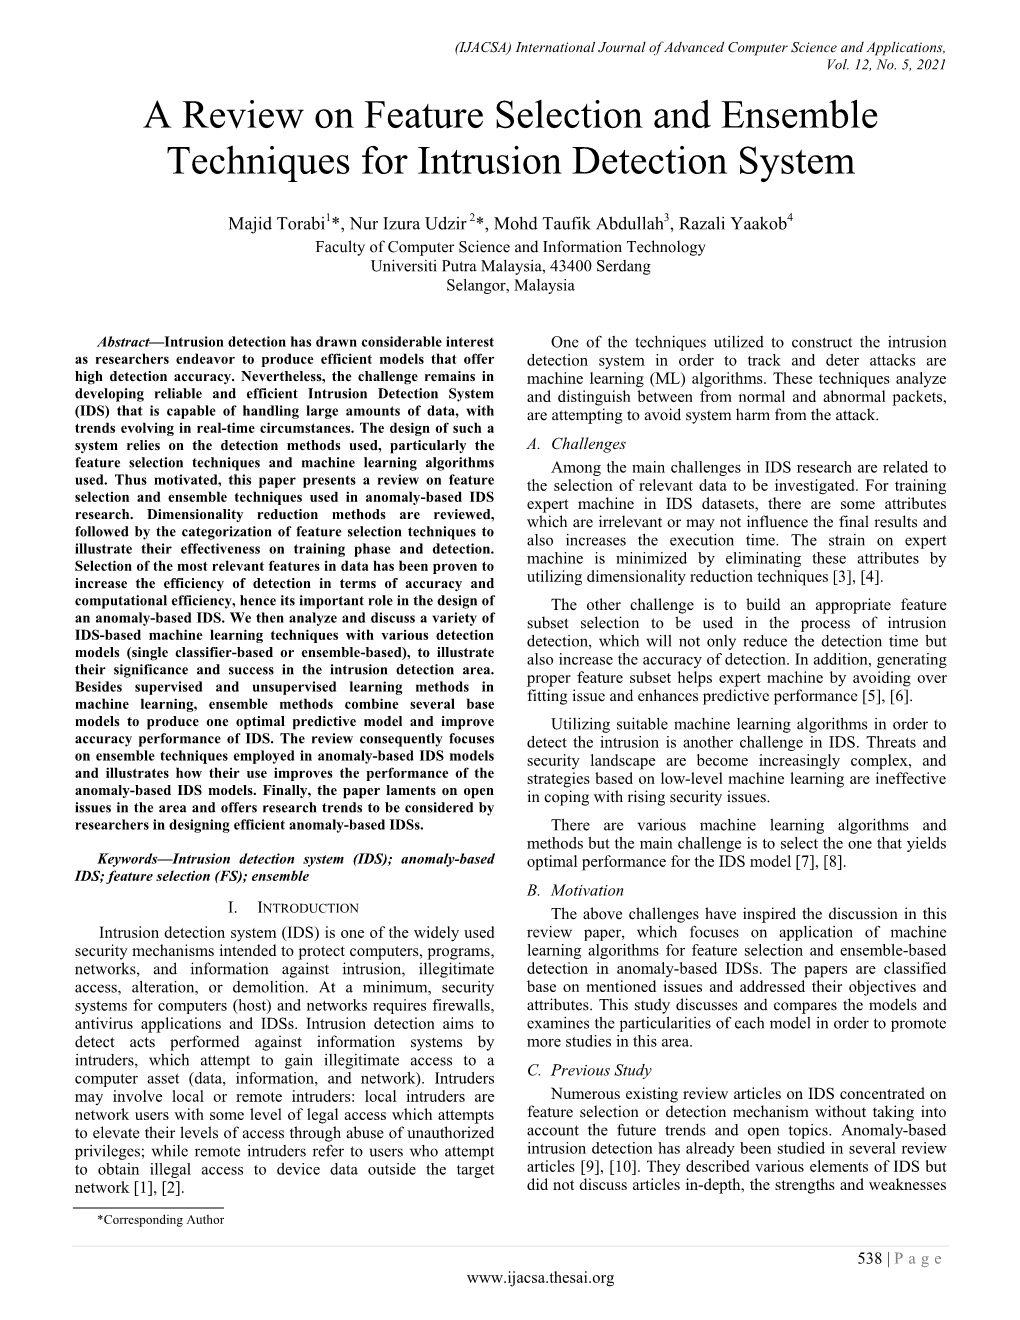 A Review on Feature Selection and Ensemble Techniques for Intrusion Detection System